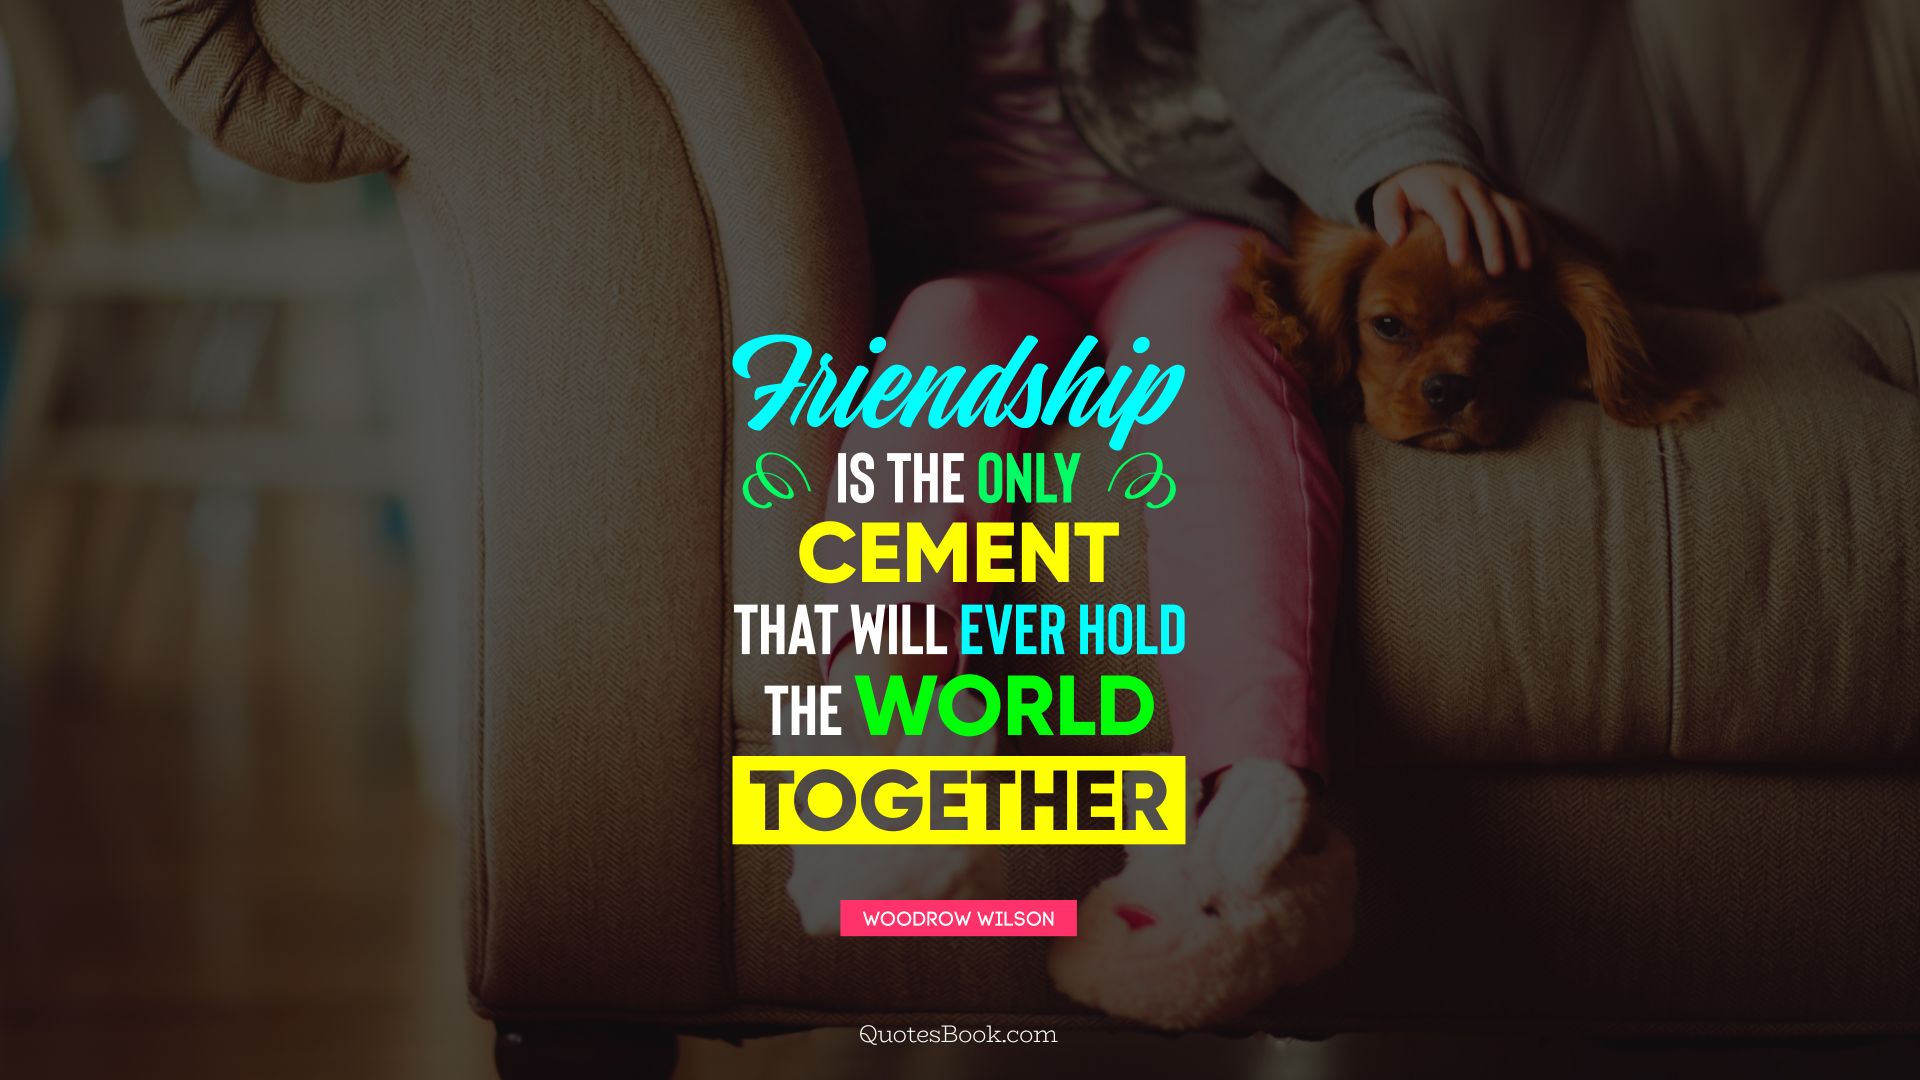 Friendship is the only cement that will ever hold the world together. - Quote by Woodrow Wilson